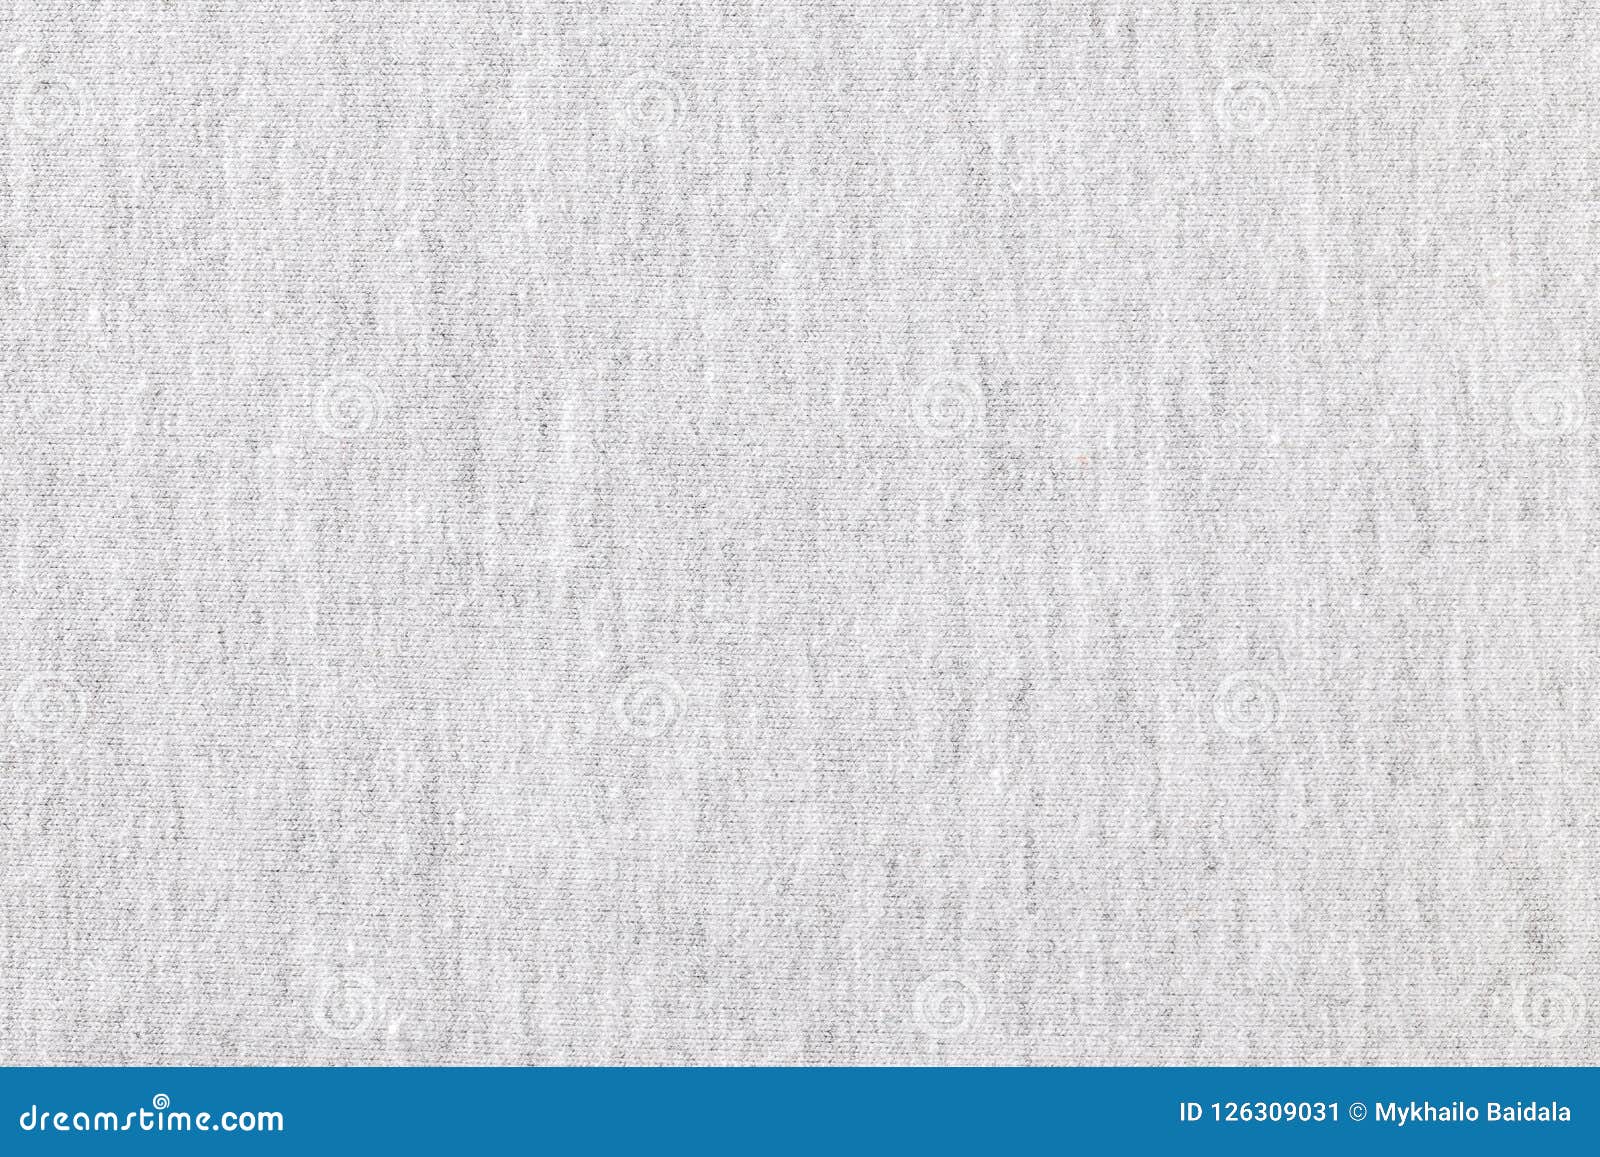 Fabric Texture Melange Light Gray Color Background Stock Image Image Of Smooth Design 126309031 ಌ color medleys & mixtures i like but don't have individual boards for ಌ. https www dreamstime com fabric texture melange light gray color background image126309031